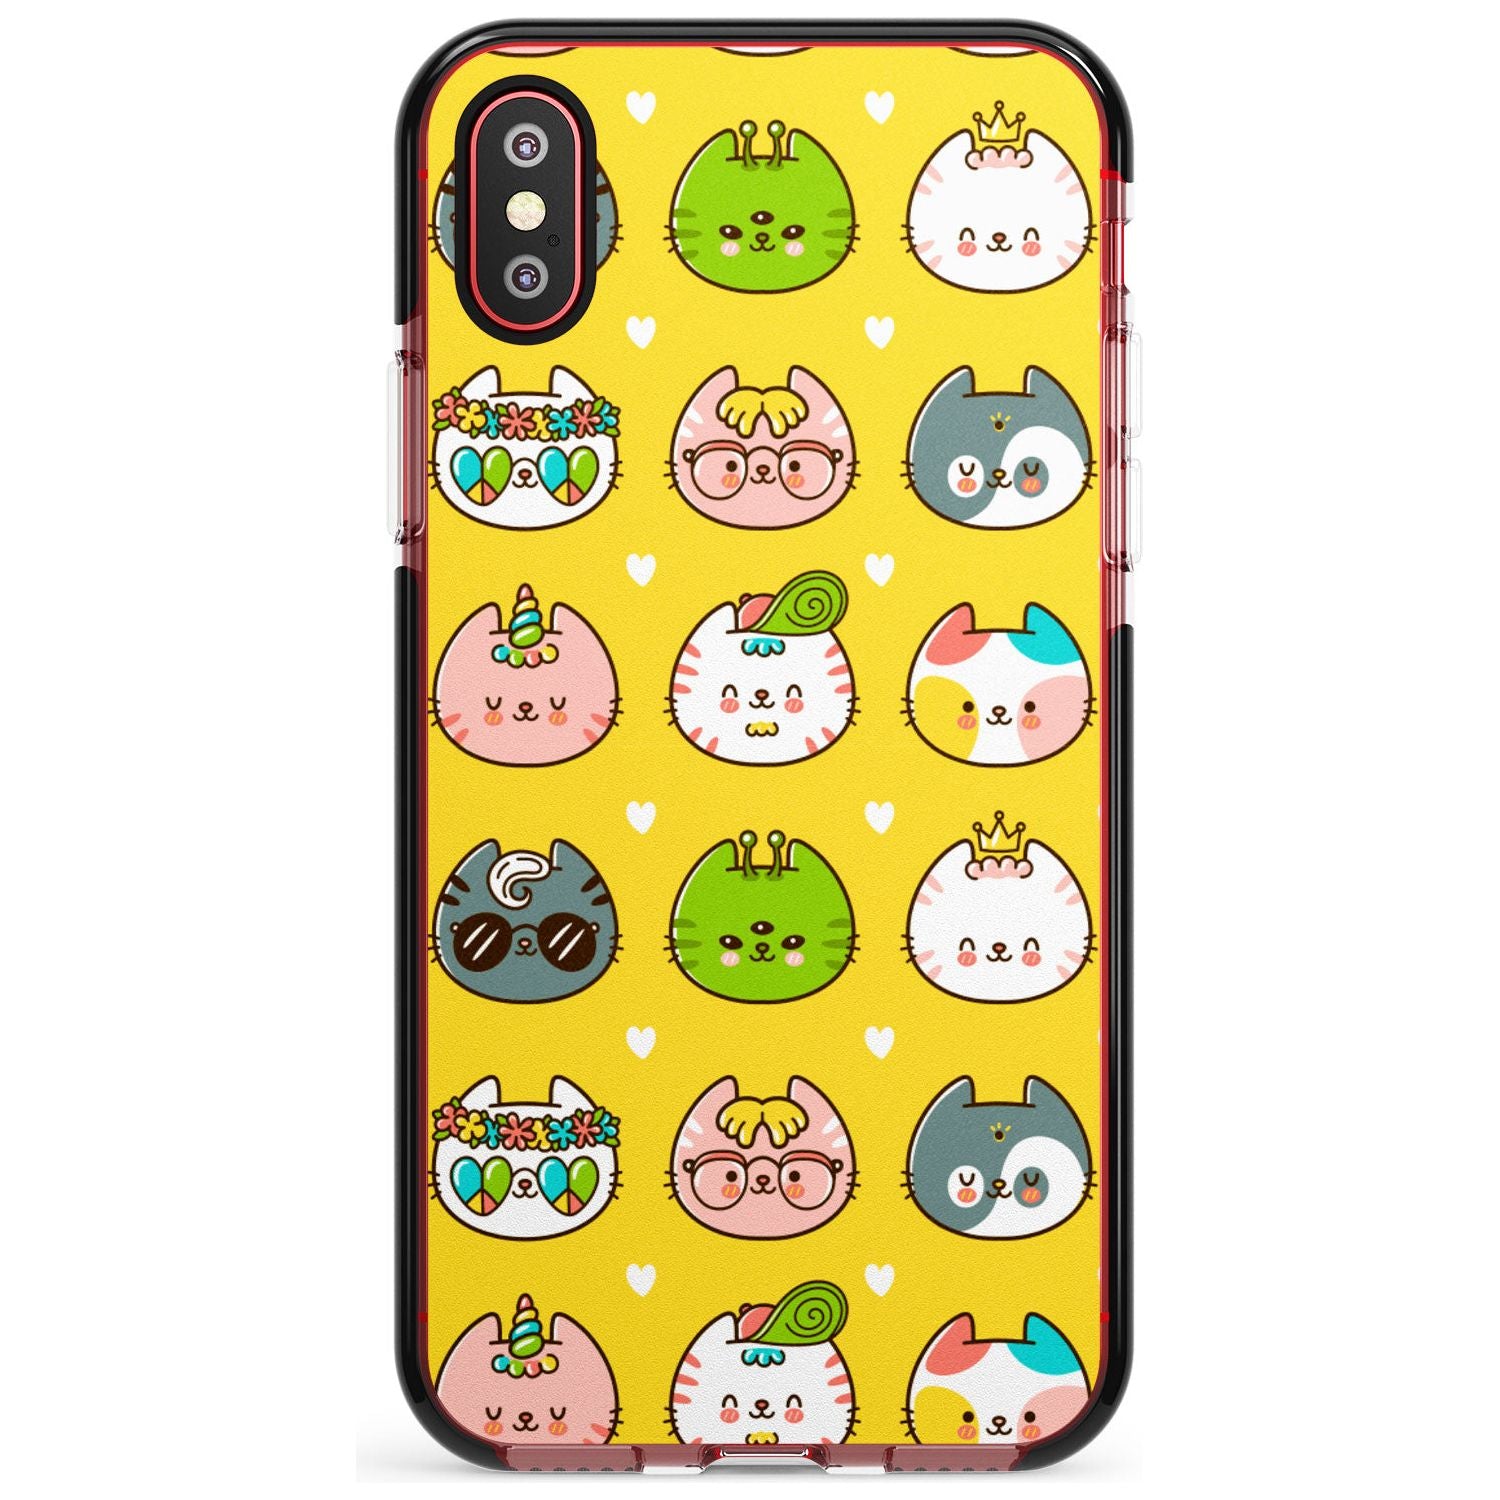 Mythical Cats Kawaii Pattern Black Impact Phone Case for iPhone X XS Max XR